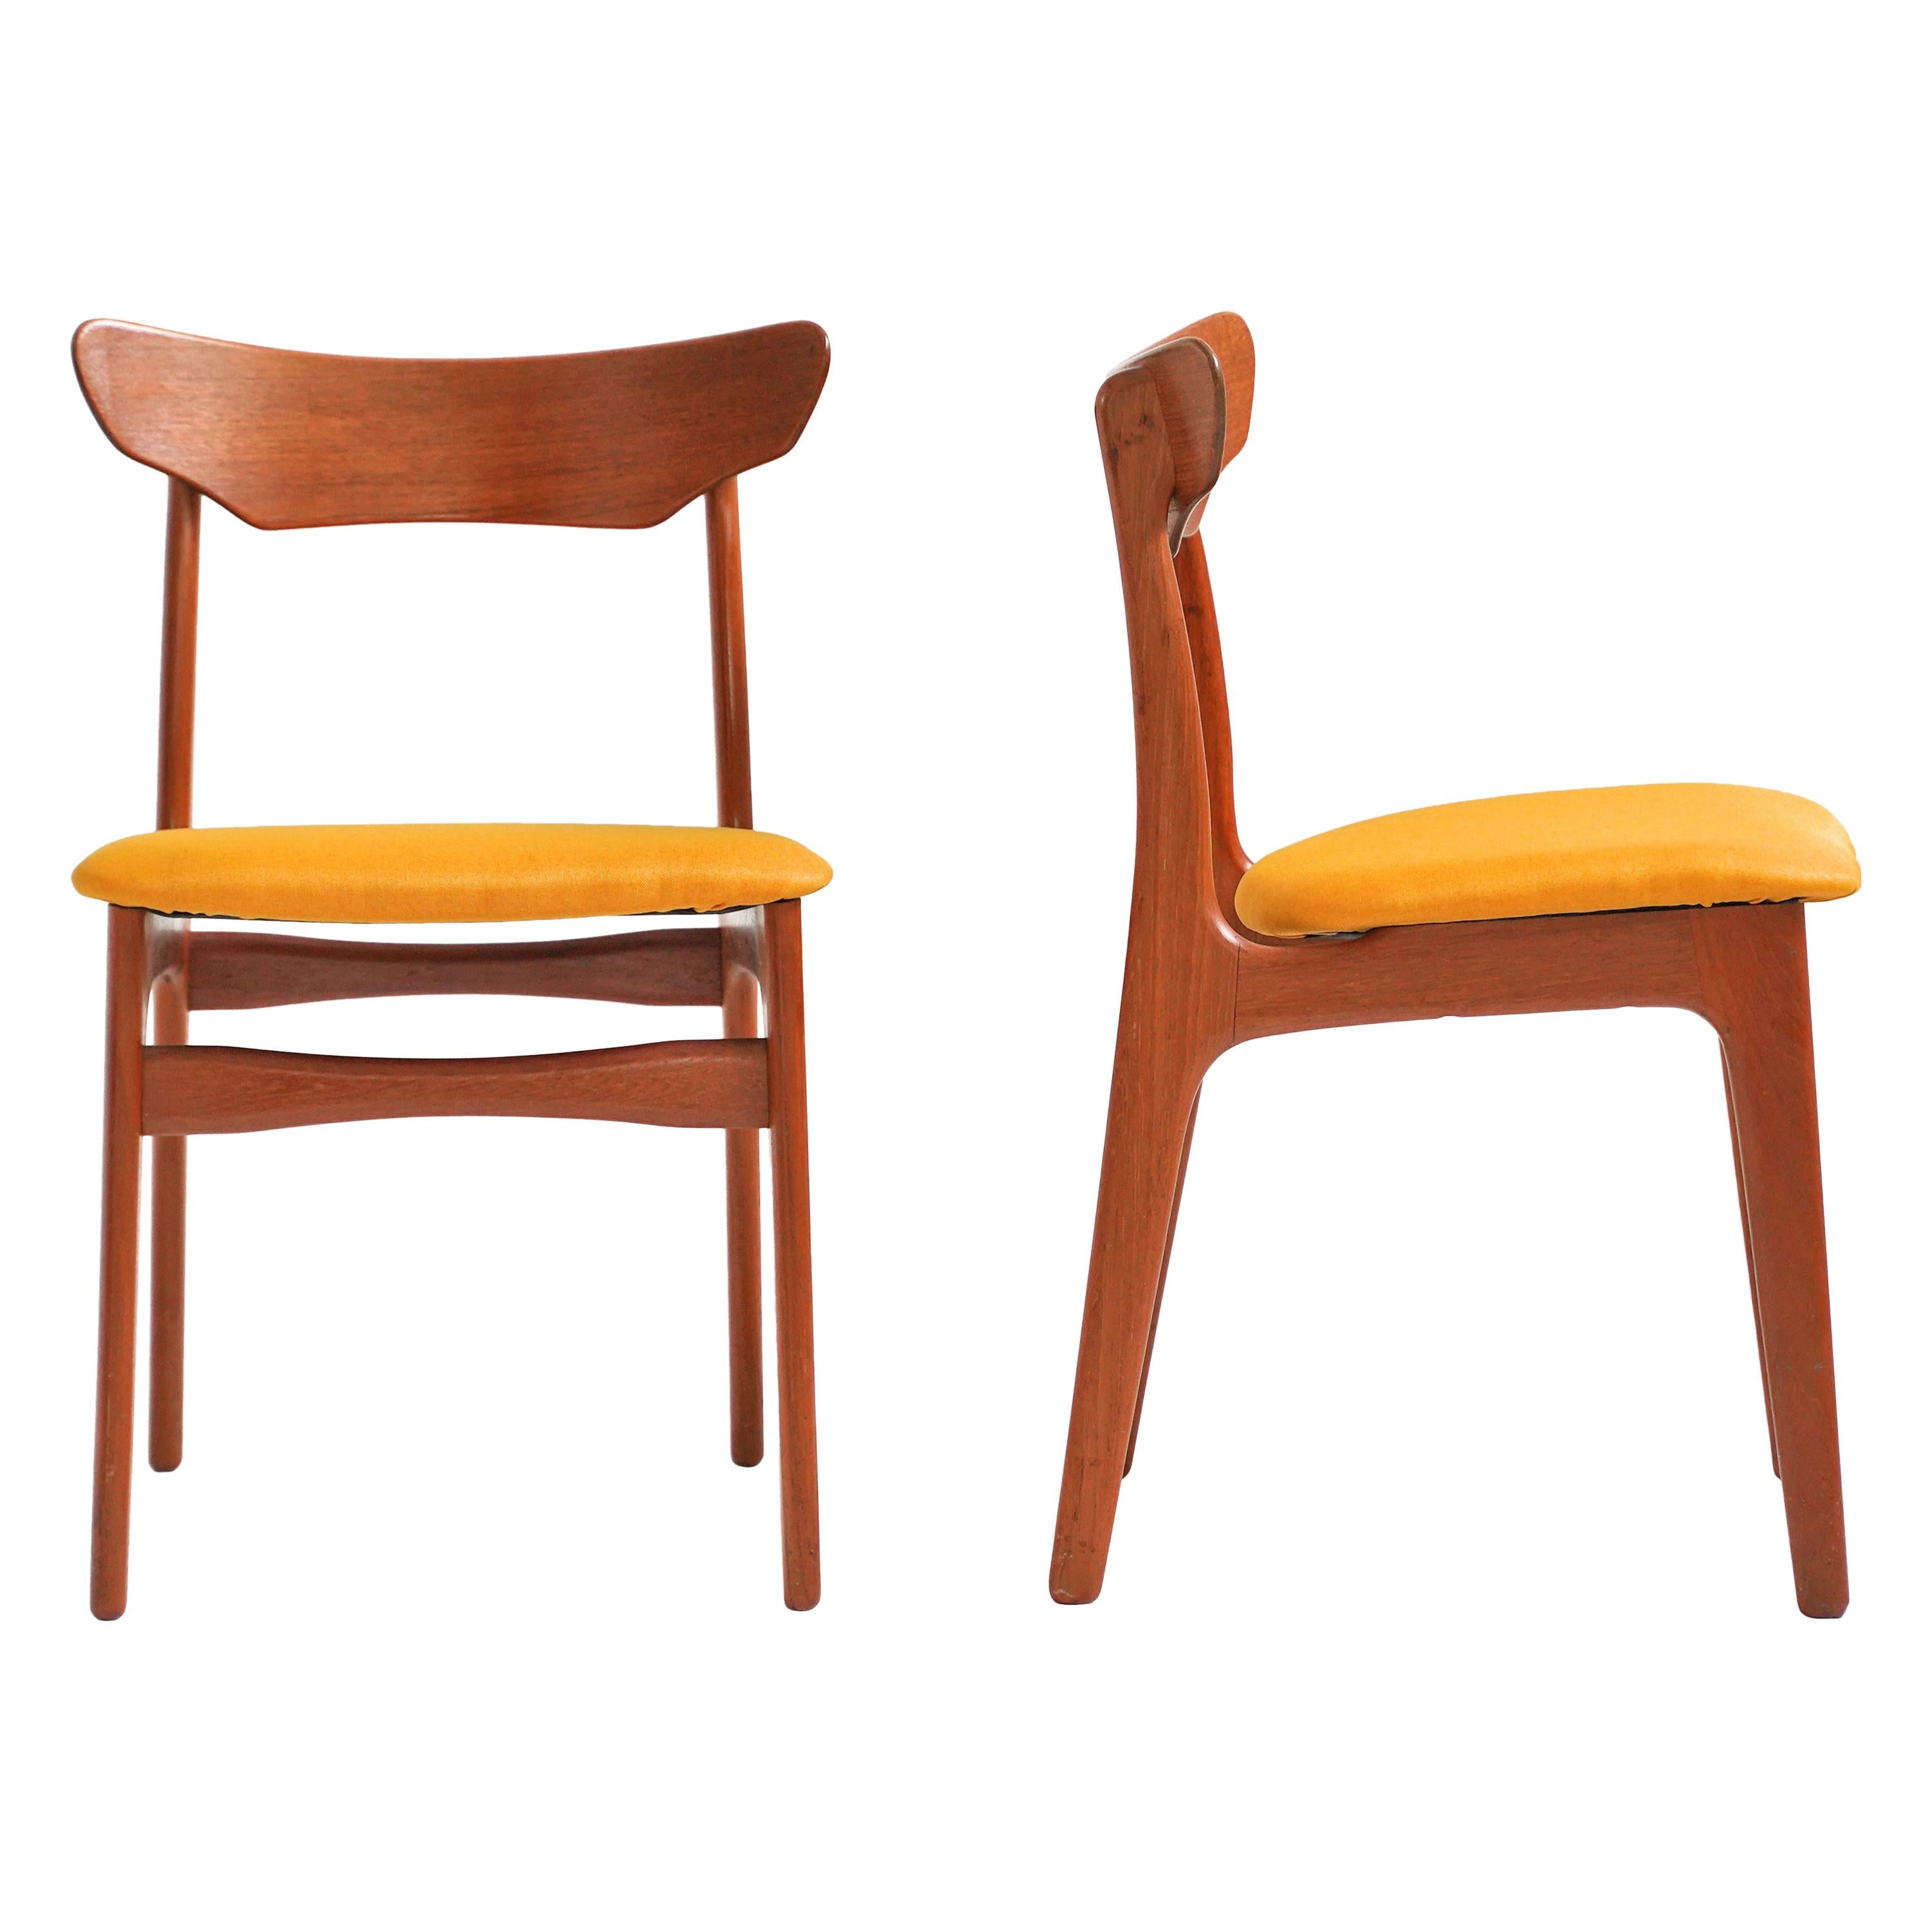 Set of 4 Danish Teak Dining Chairs in Mustard for Schionning & Elgaard